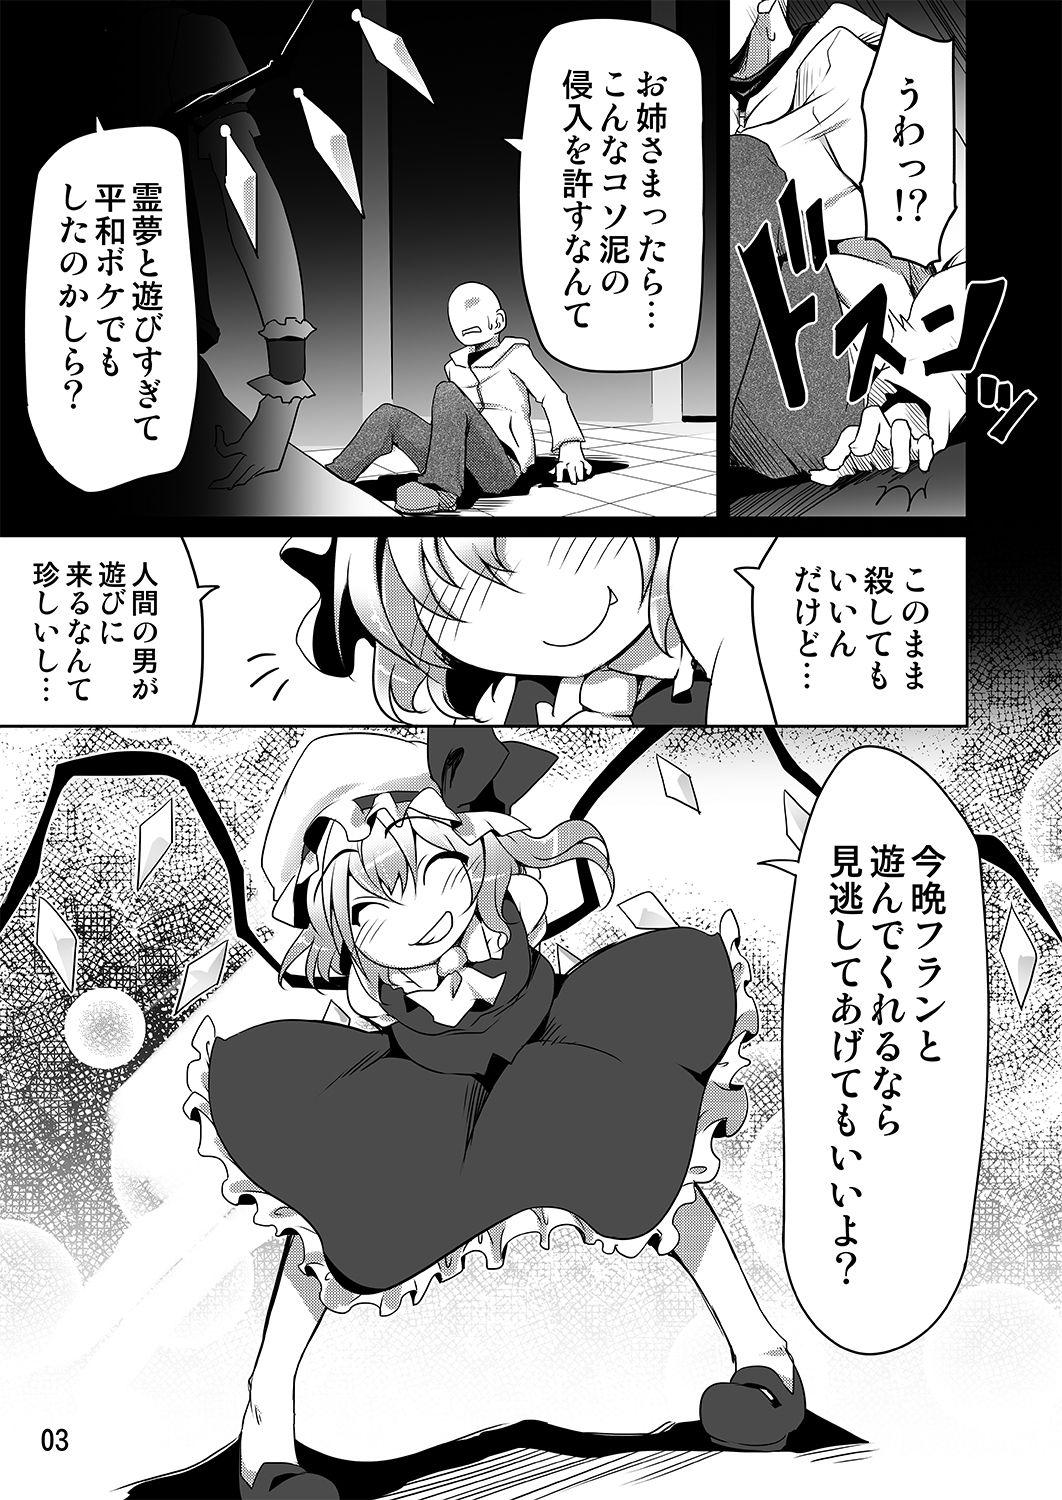 Con Flan to Issho - Touhou project Gemendo - Page 2